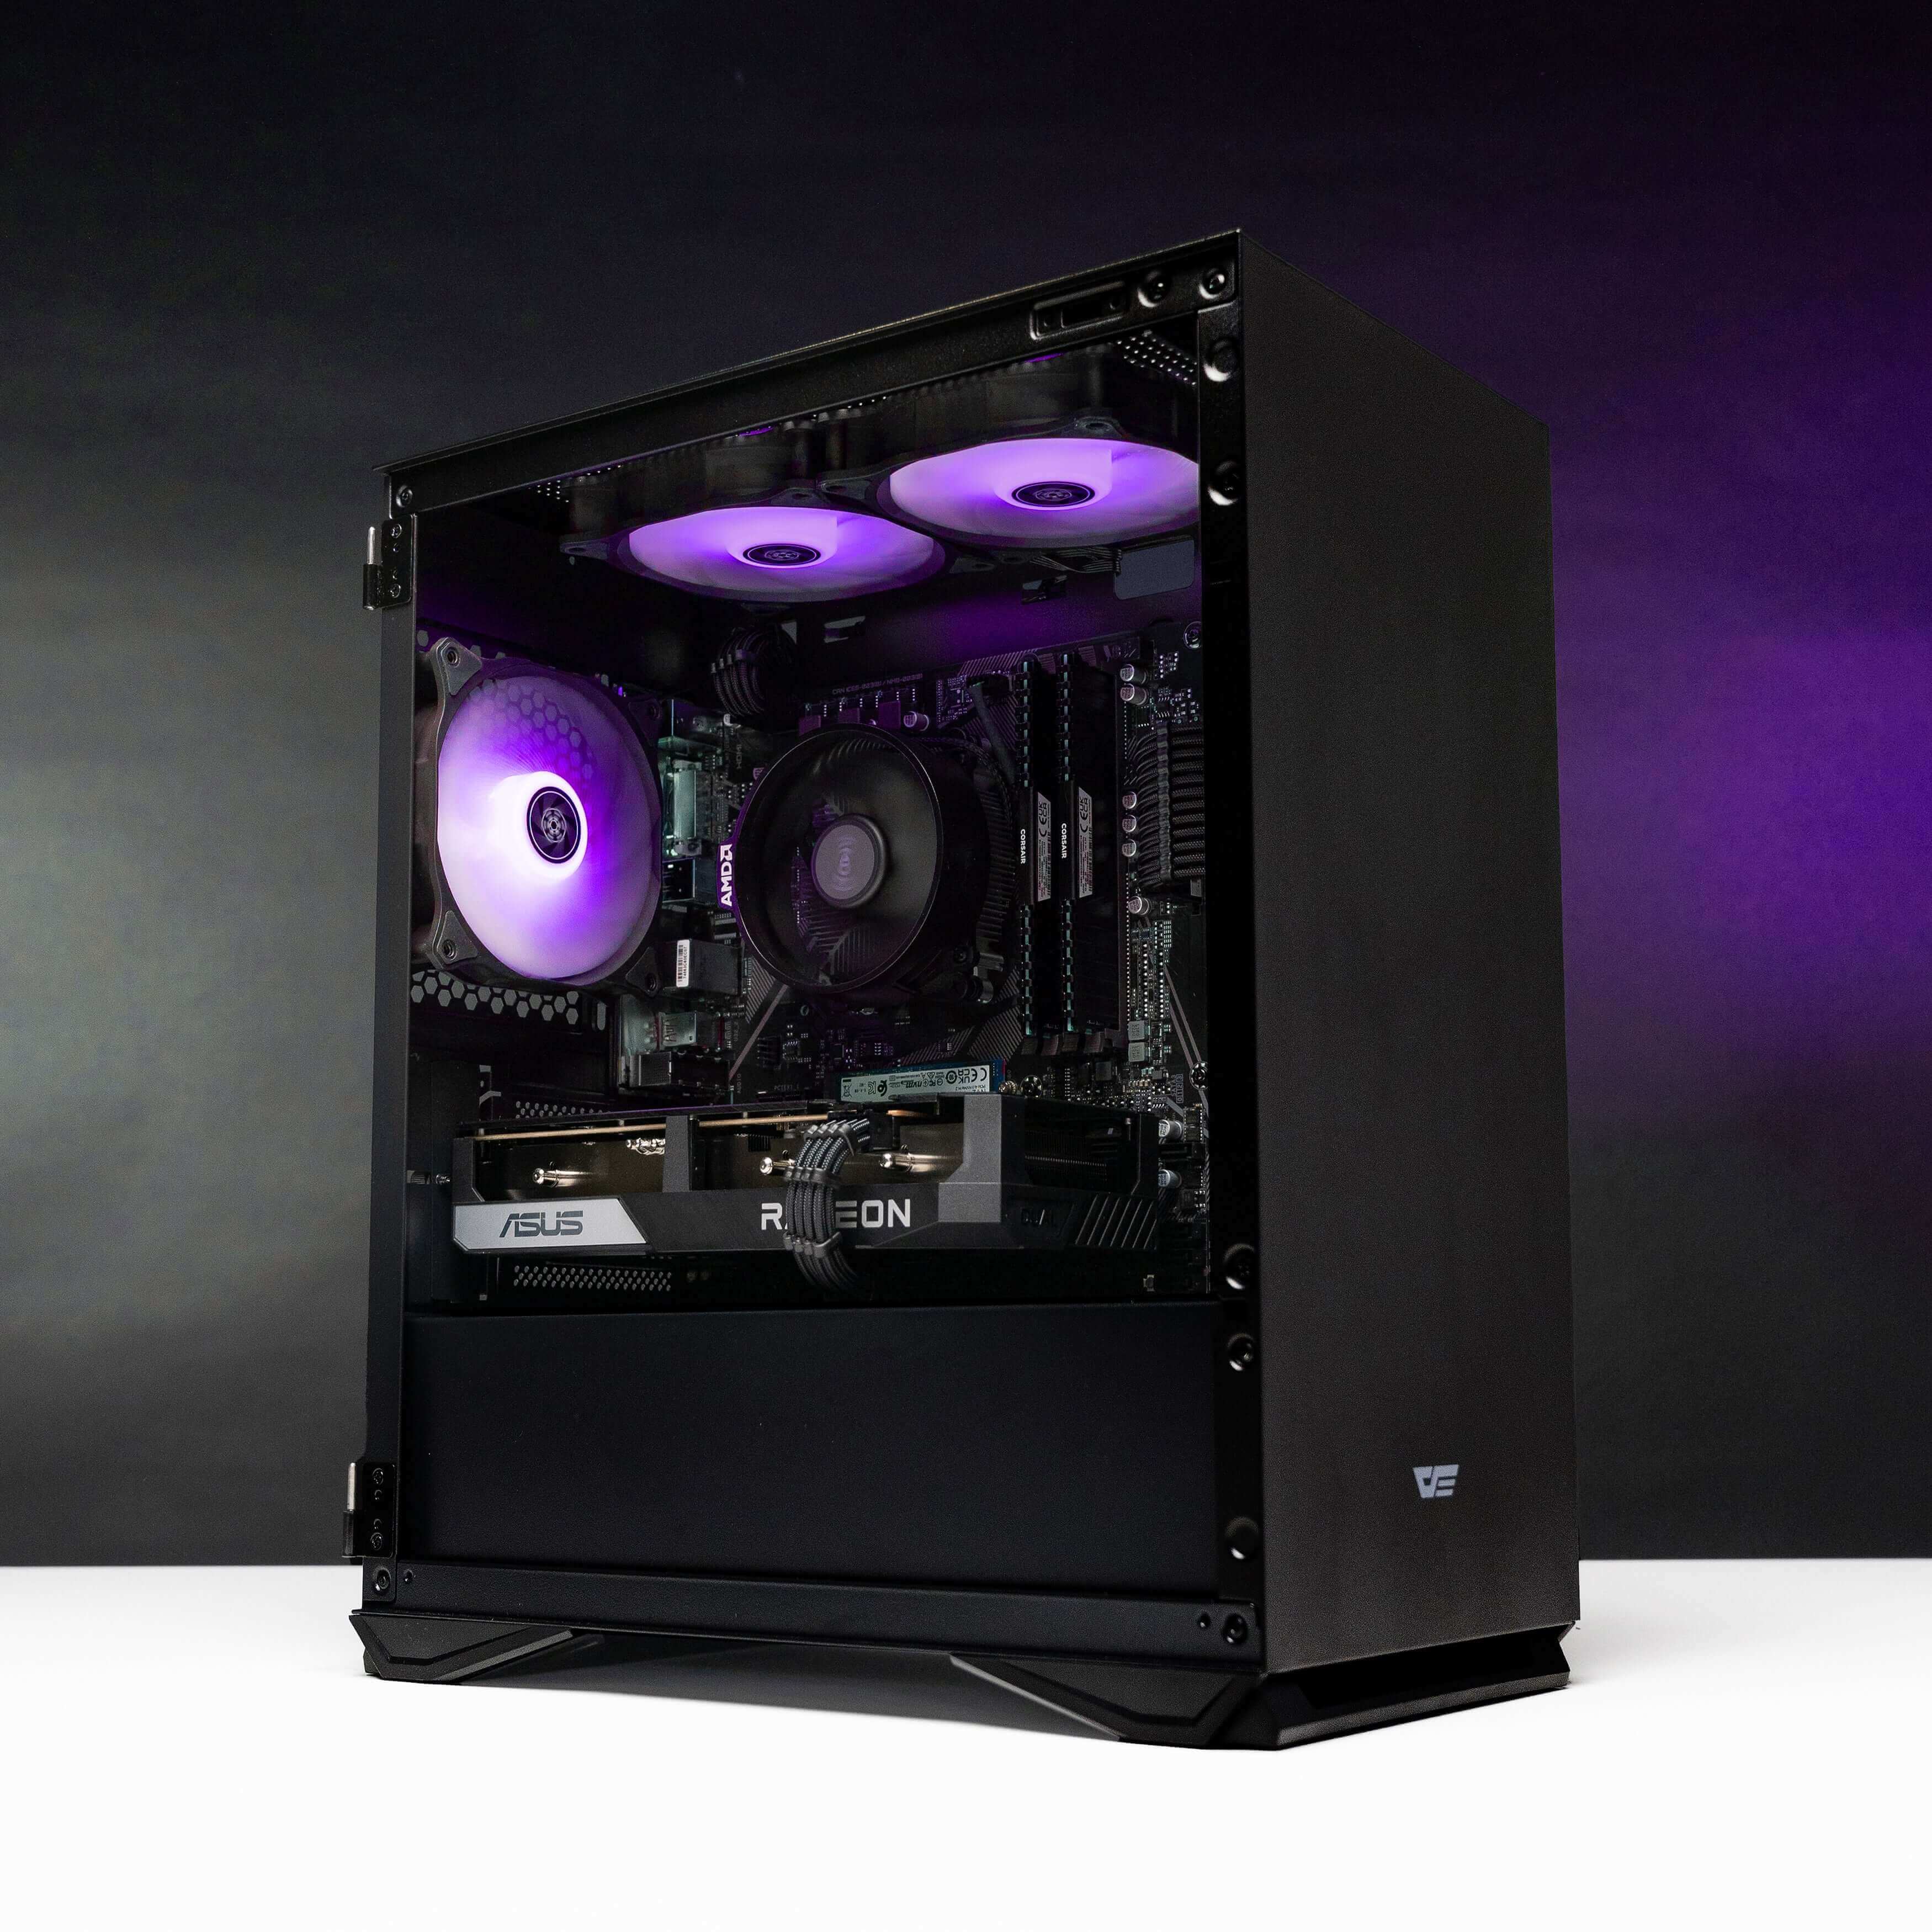 Frontal View of the Arrow LVL 12 Gaming PC Showcasing its Sleek Design